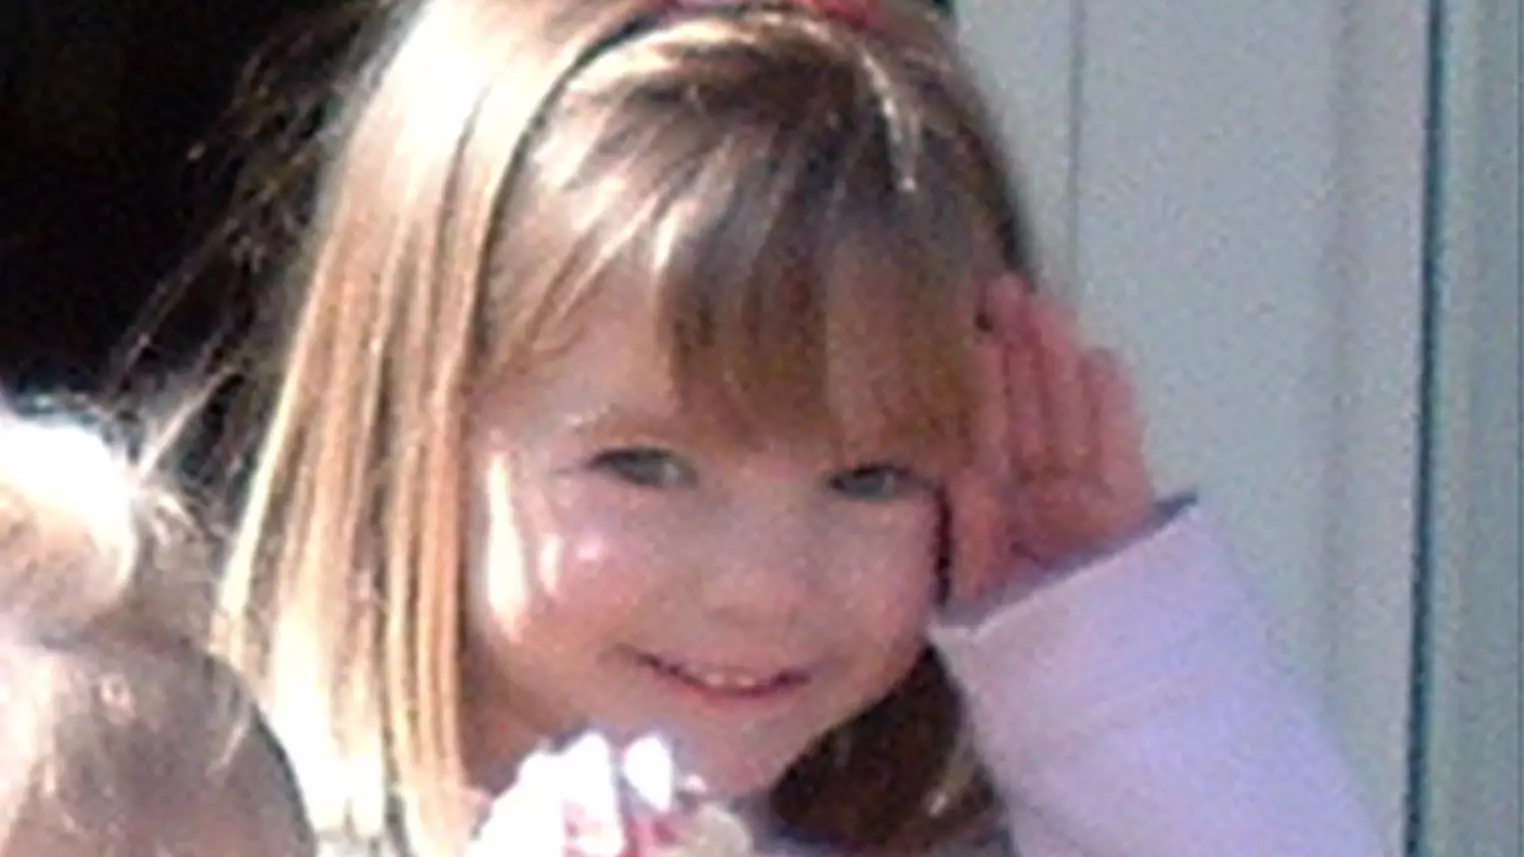 New Documentary Series Investigates Whether 'Christian B' Abducted Madeleine McCann